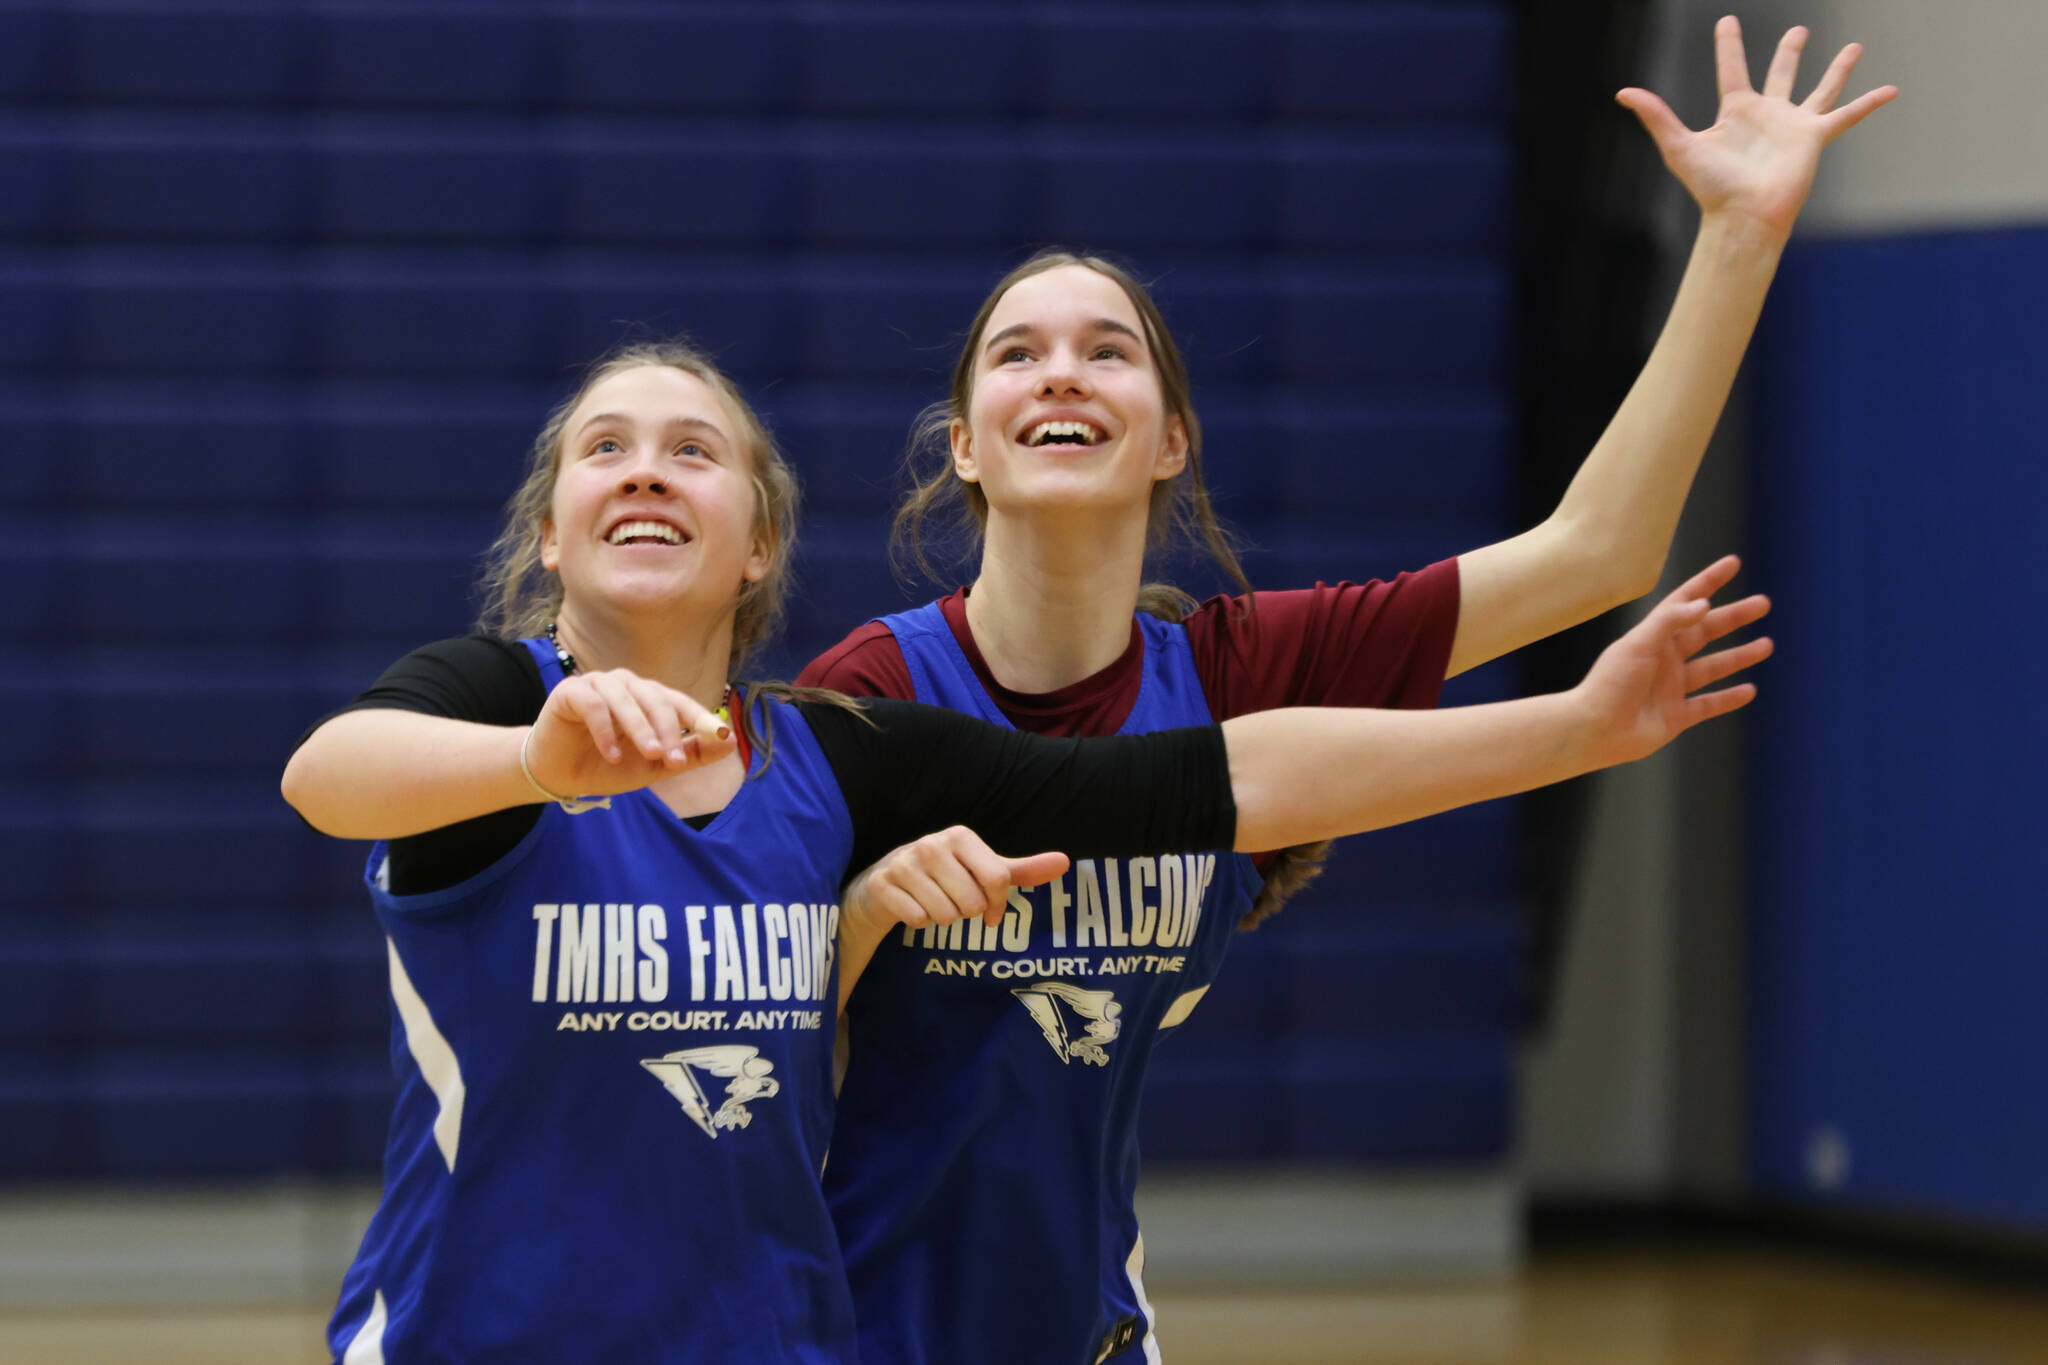 Ashlyn Gates and Cailynn Baxter practice boxing out during practice at Thunder Mountain High School. Gates and the Baxter twins are among the athletic core that gives coach Andly Lee confidence that TMHS can compete with any team on its schedule.  (Ben Hohenstatt / Juneau Empire)